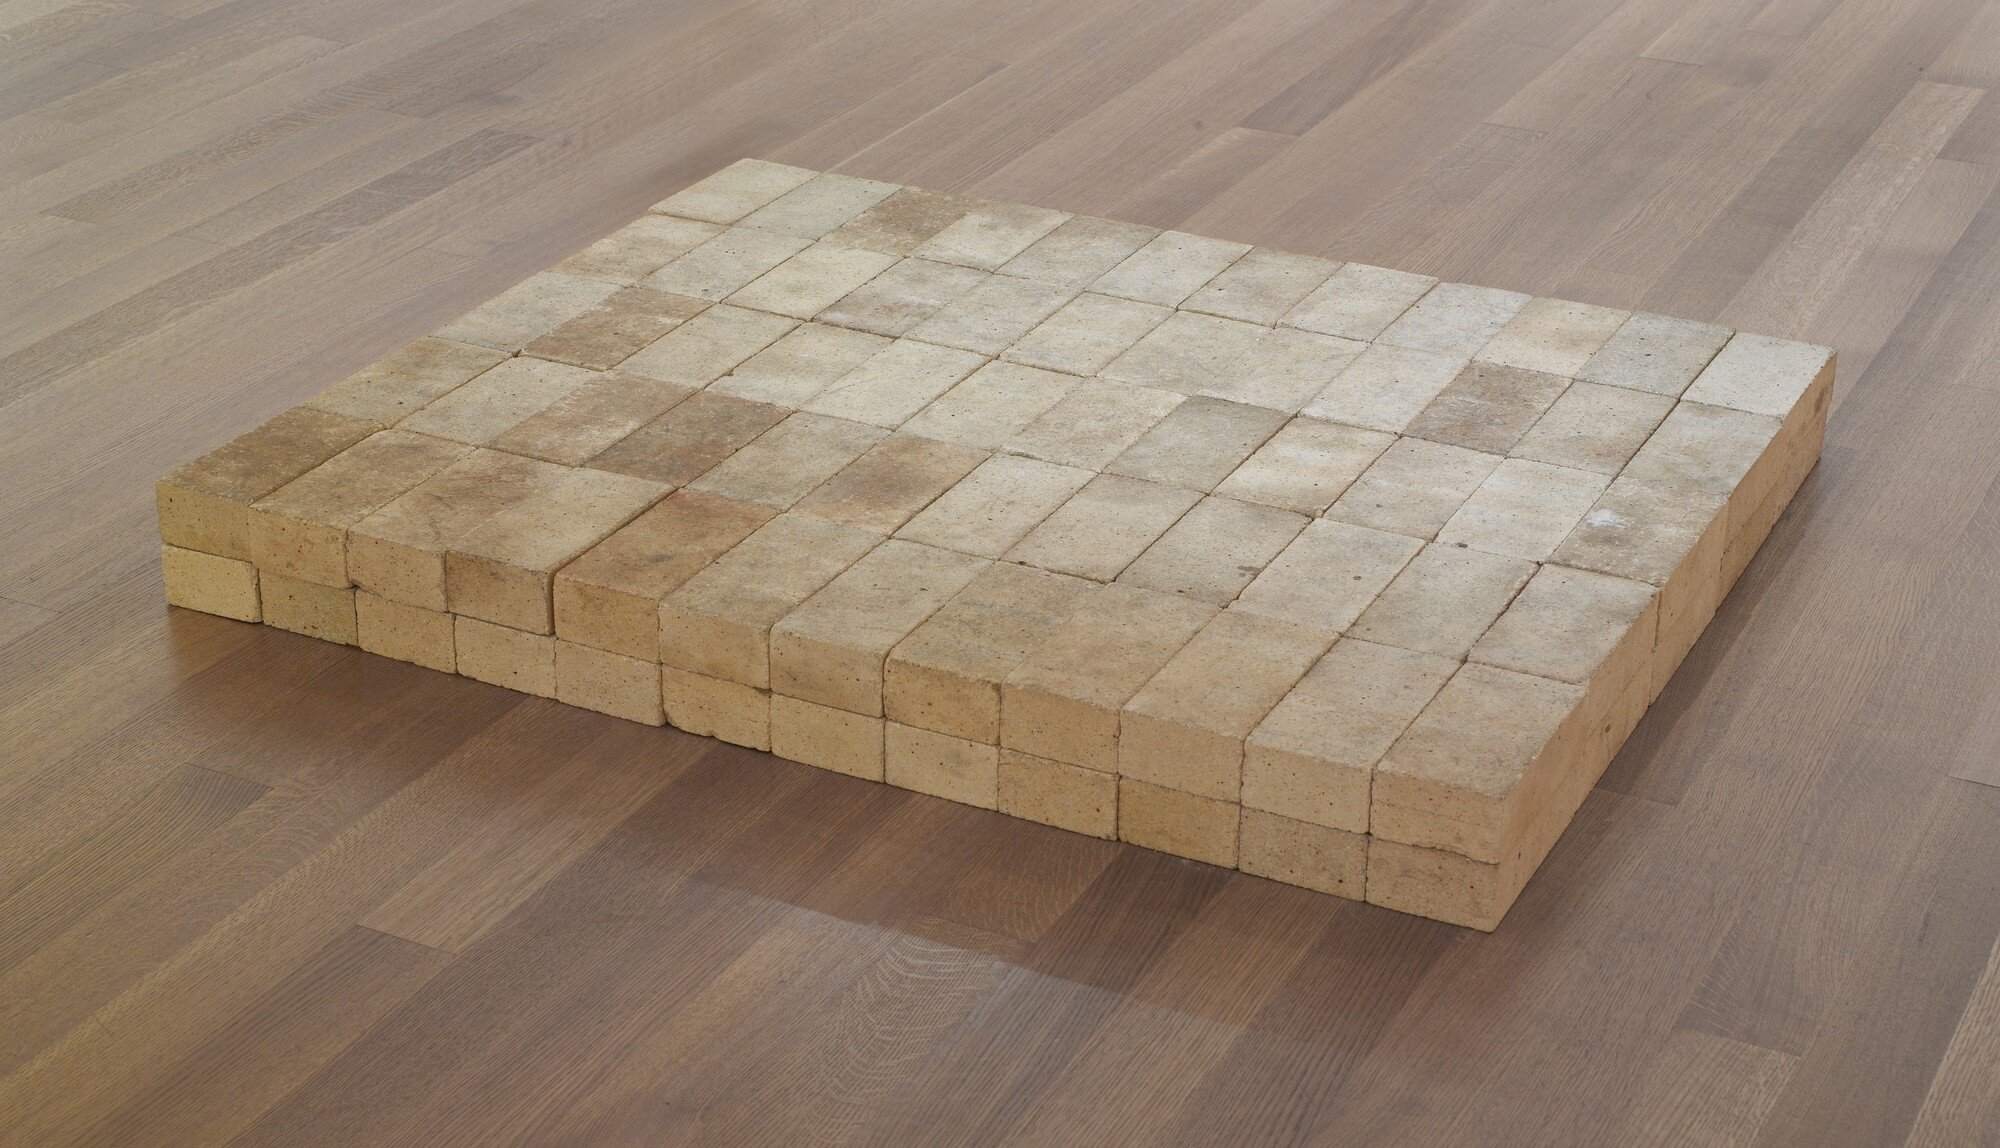 Equivalent V by Carl Andre